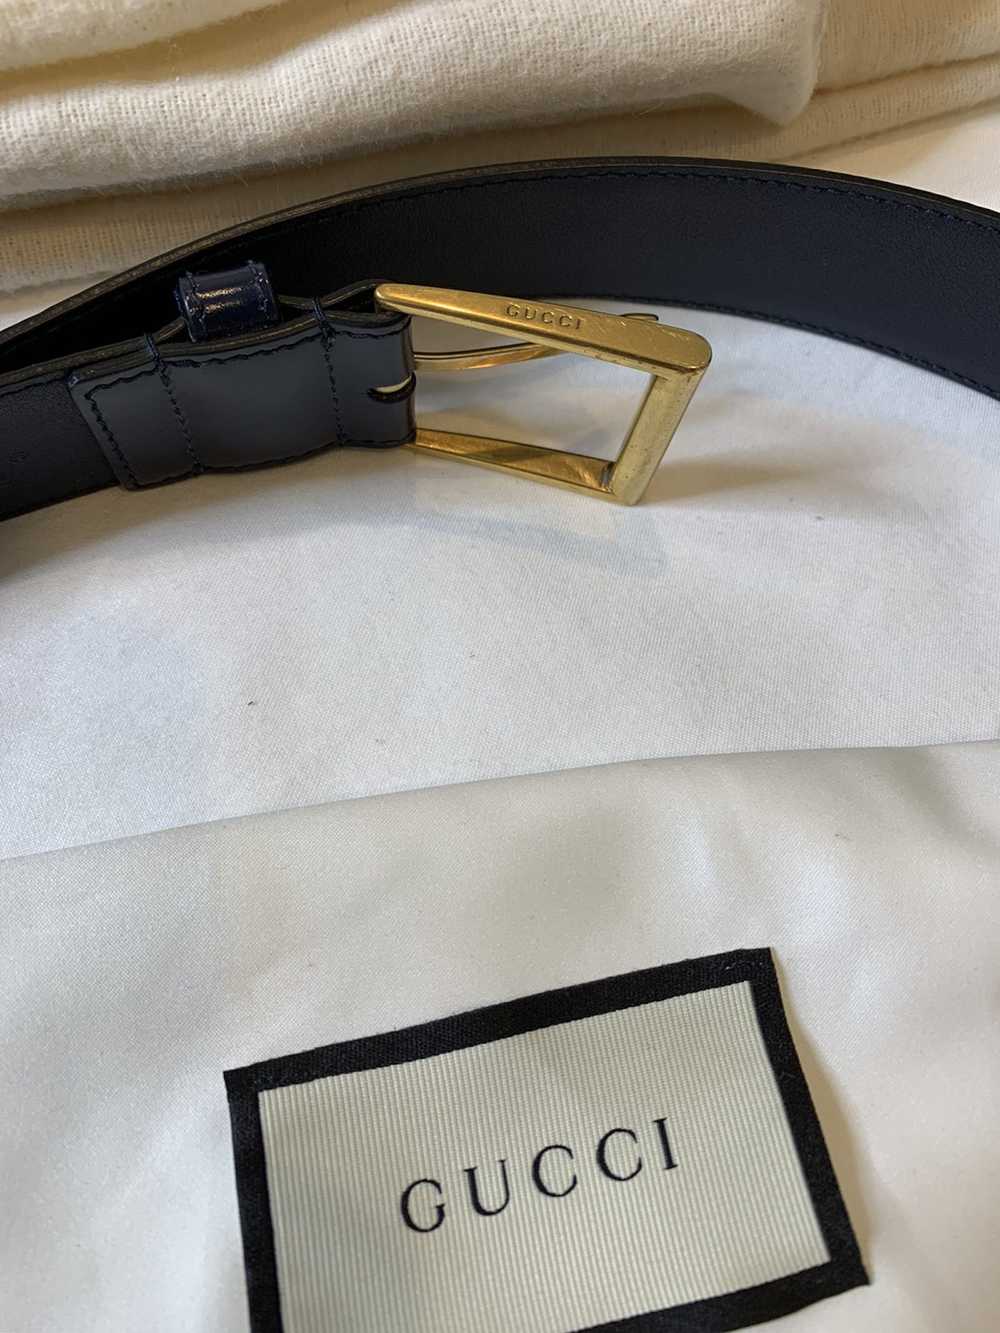 Gucci Gucci Leather Belt Gold Buckle - image 5